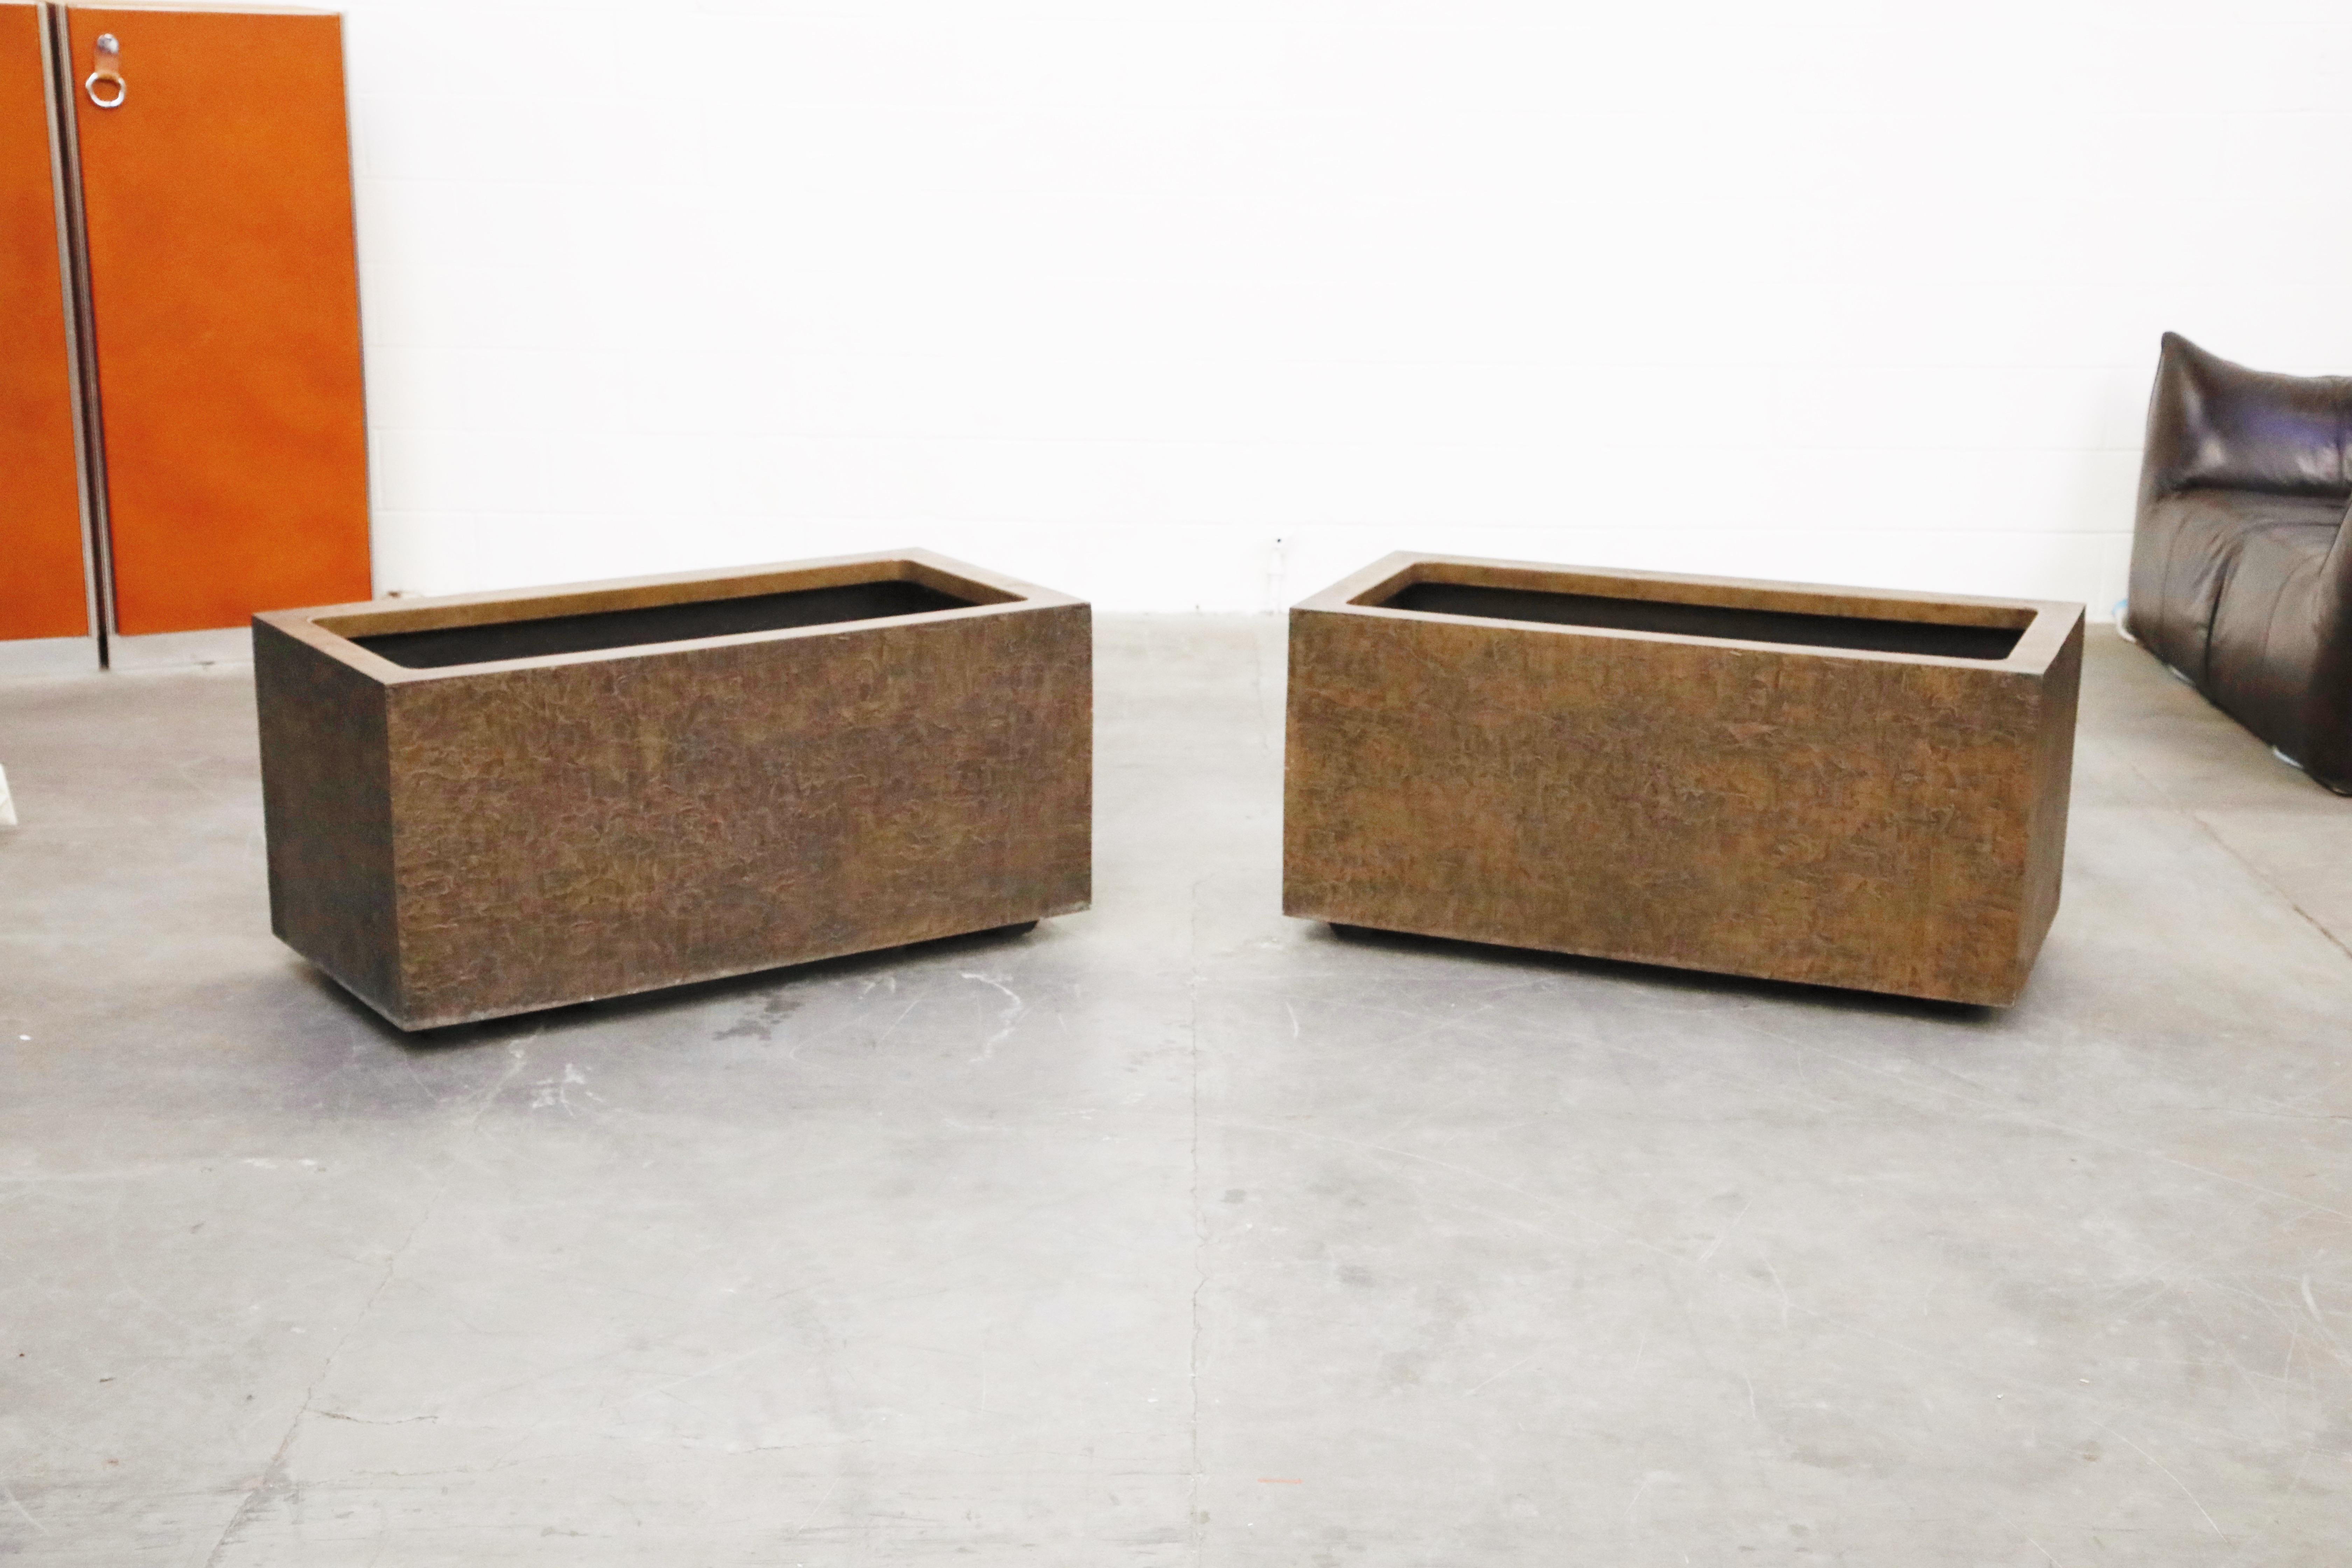 A pair of rare architectural fiberglass planters by Forms and Surfaces designed and produced in the 1970s. These large impressive rectangular pots feature a Brutalist textured bronze colored fiberglass exterior. These large planters are suitable for